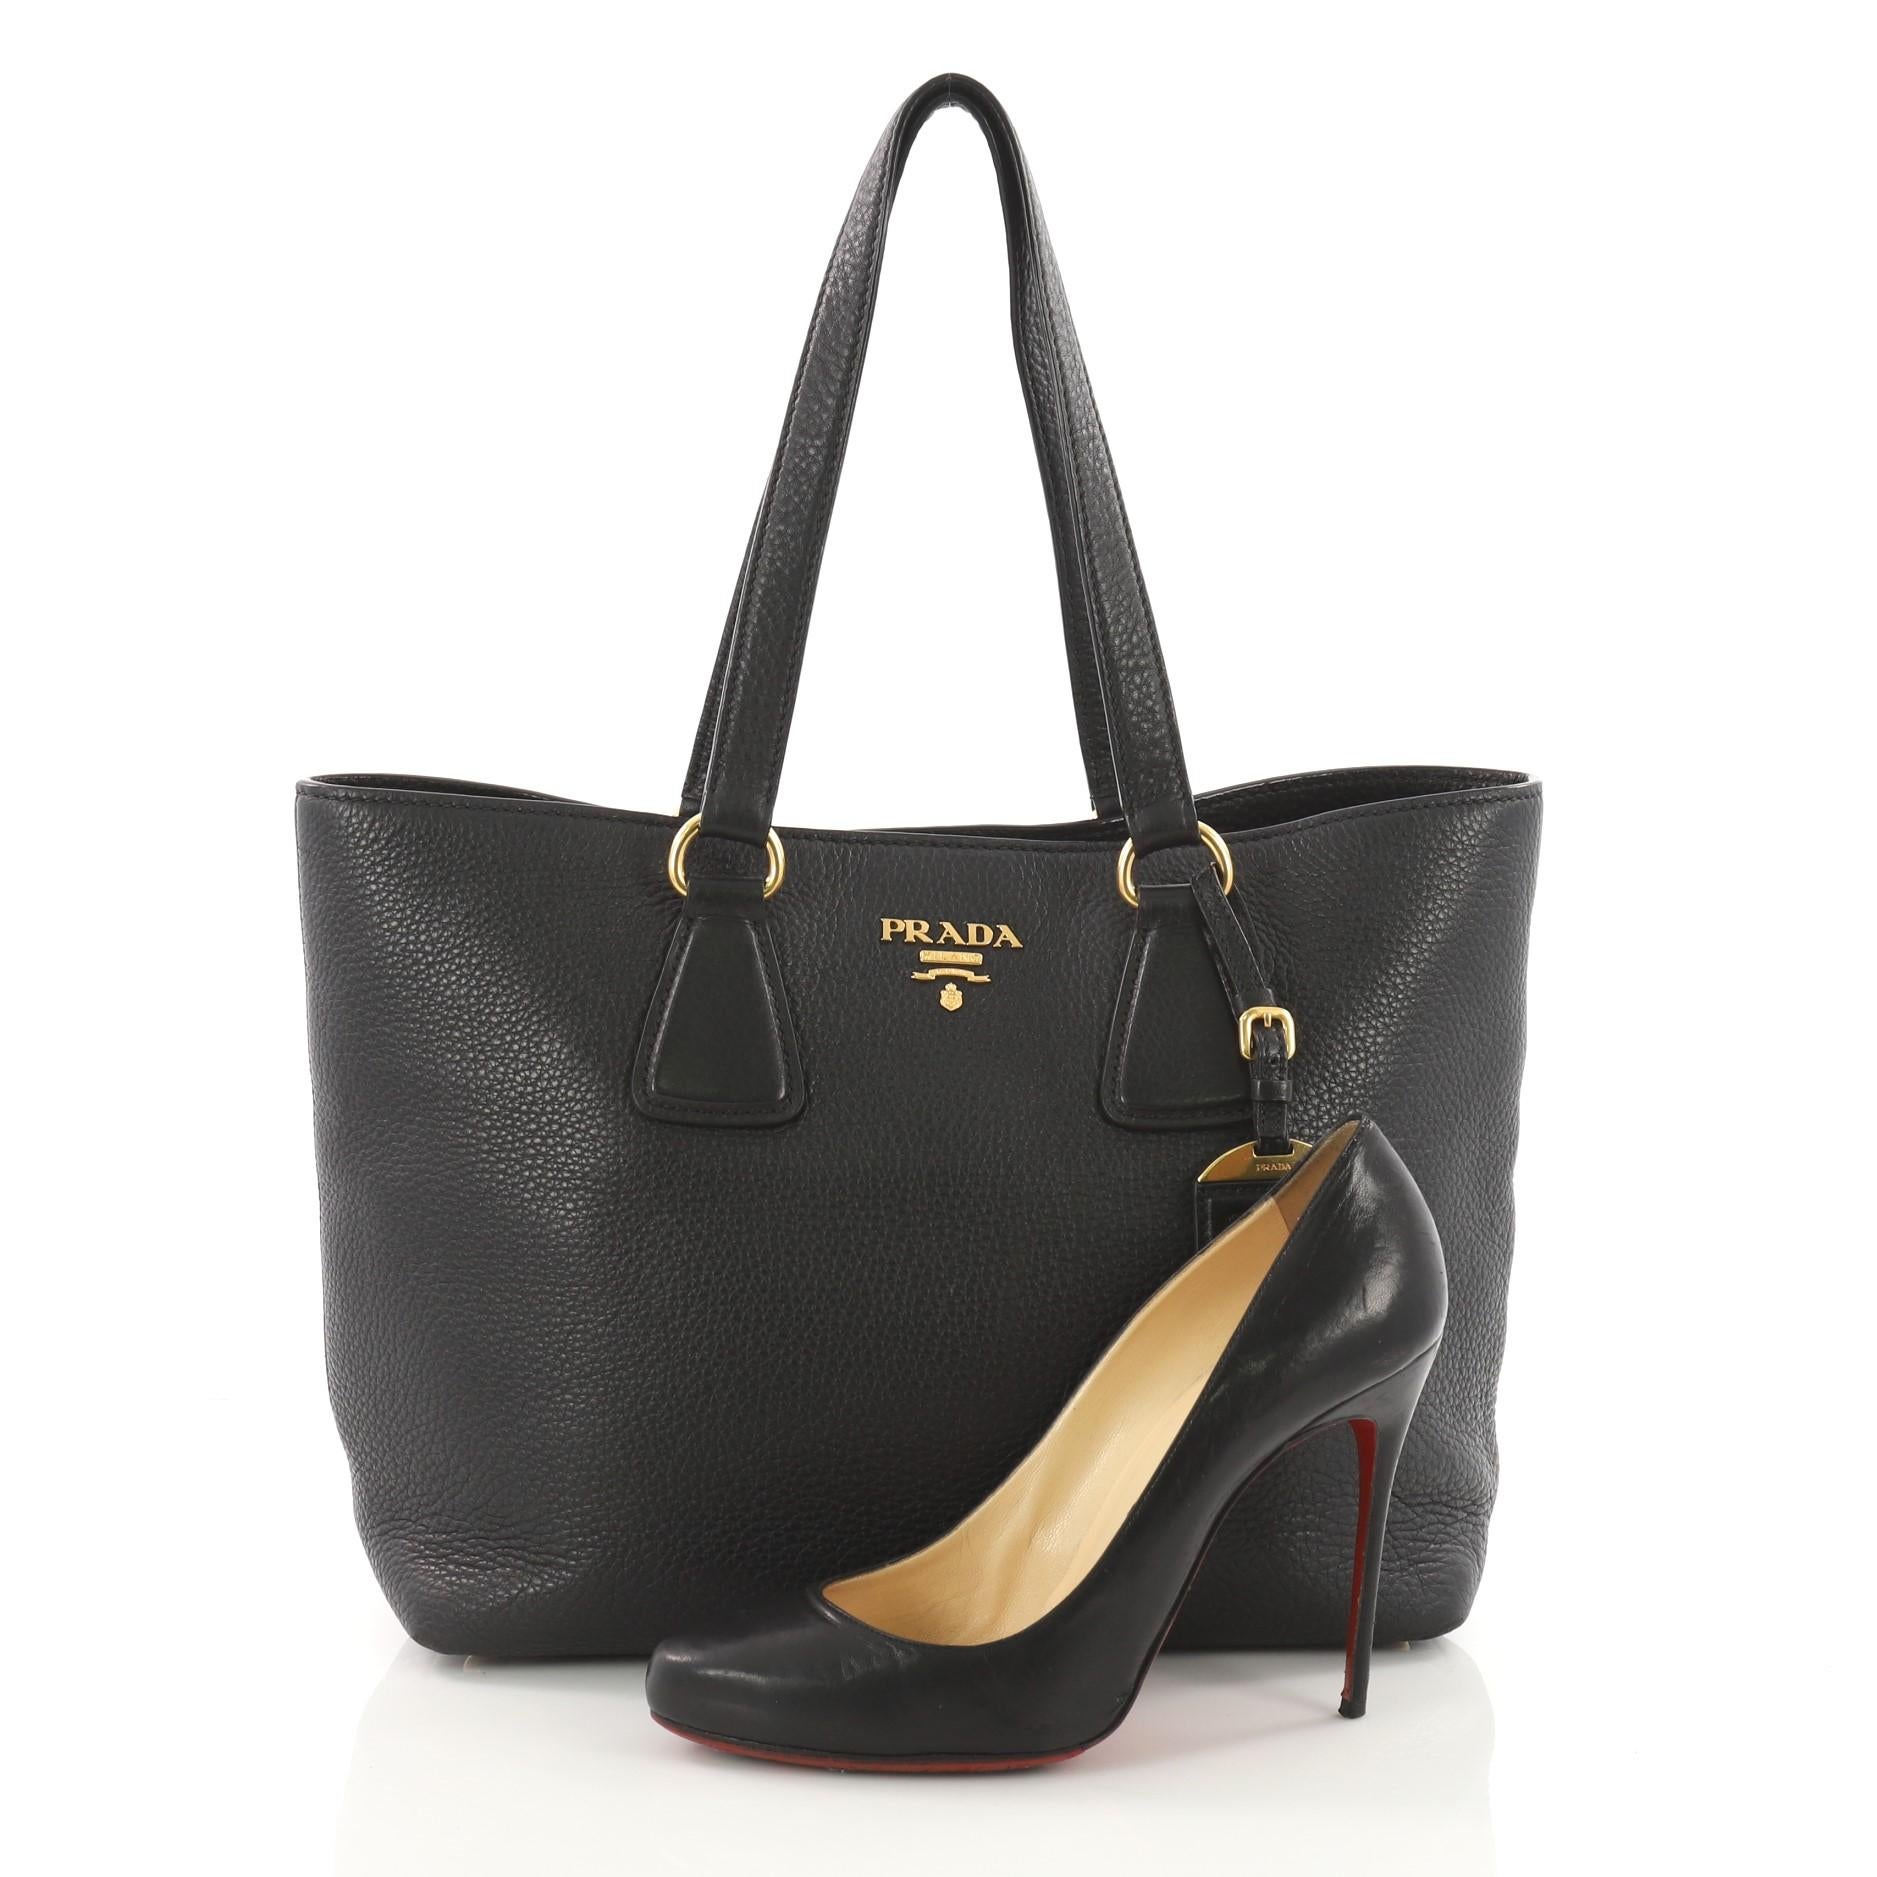 This authentic Prada Open Tote Vitello Daino Small is a chic and stylish everyday bag for casual looks. Crafted from black vitello daino leather, this simple and functional tote features dual-flat leather handles, signature Prada logo, and gold-tone